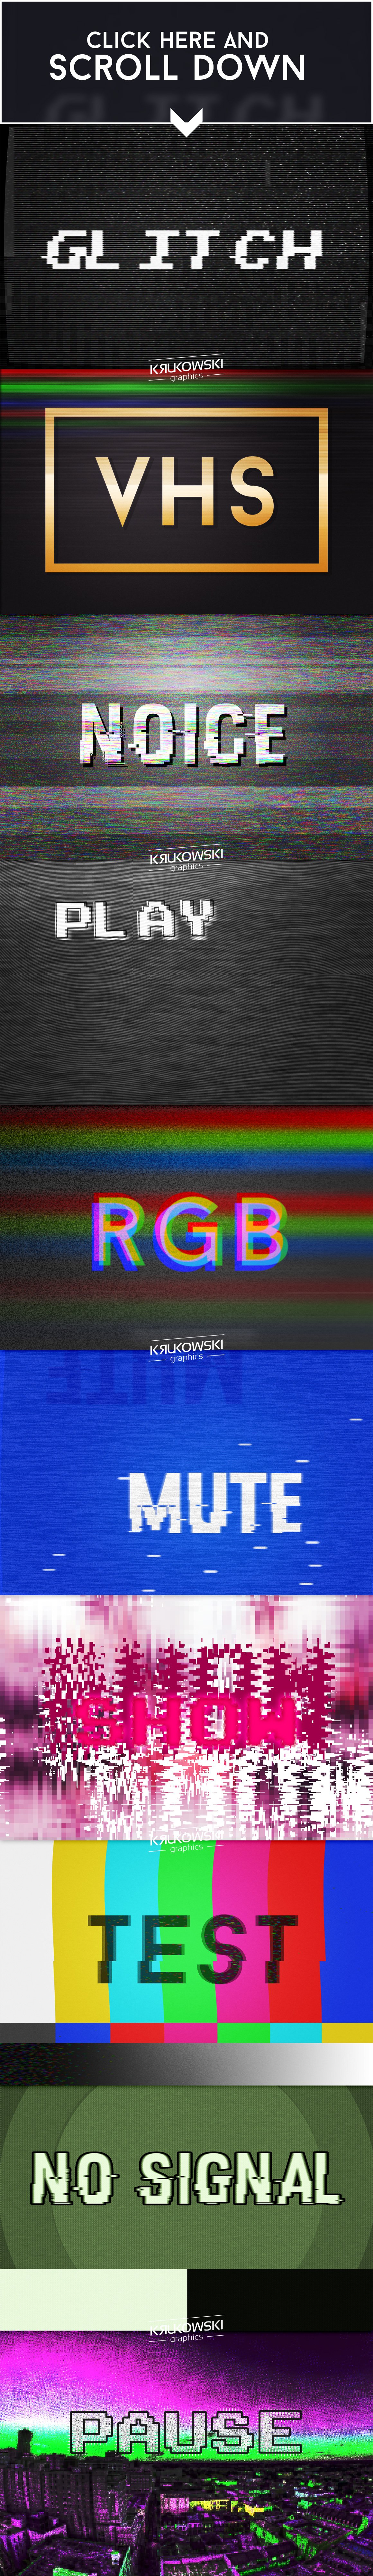 Glitch Text Effectspreview image.